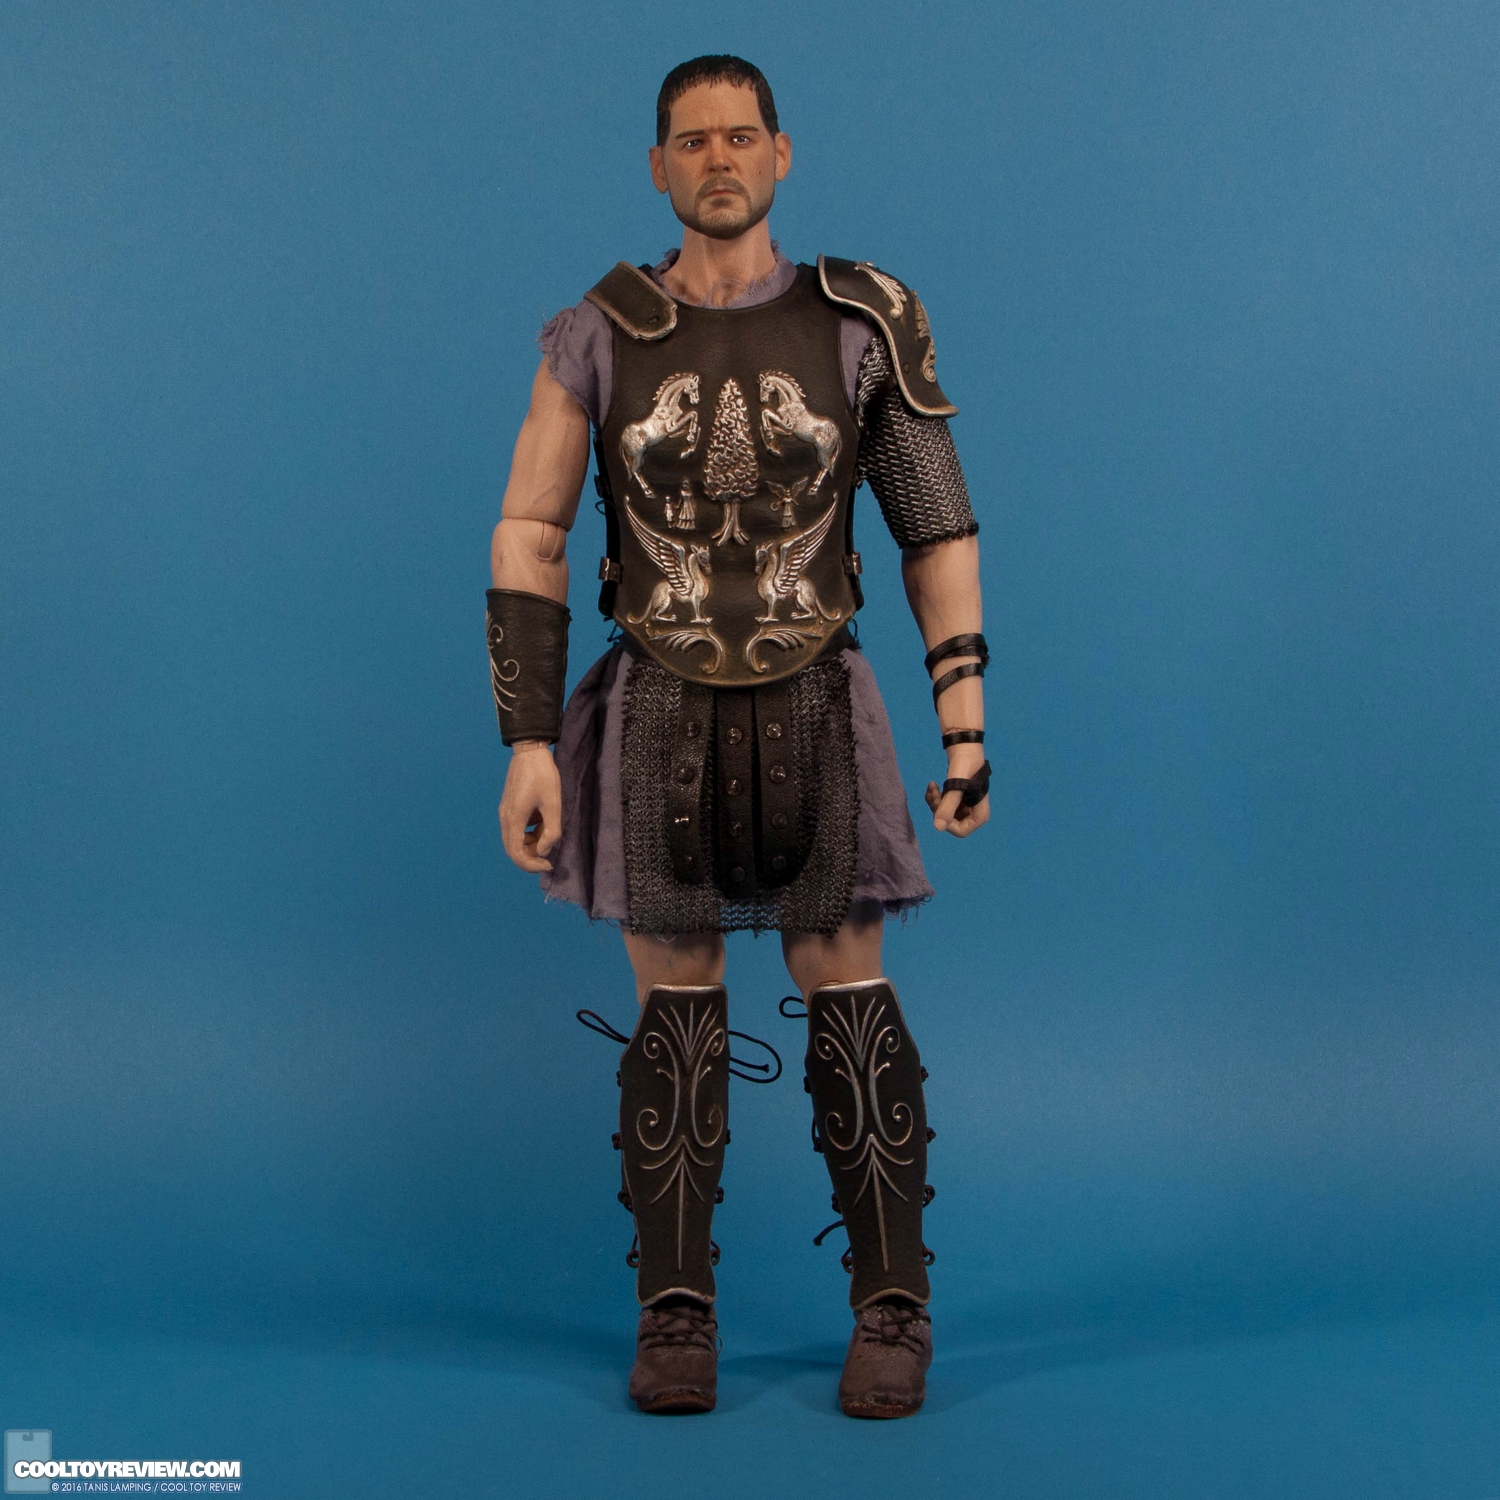 pangaea-toy-gladiator-general-sixth-scale-collectible-figure-001.jpg